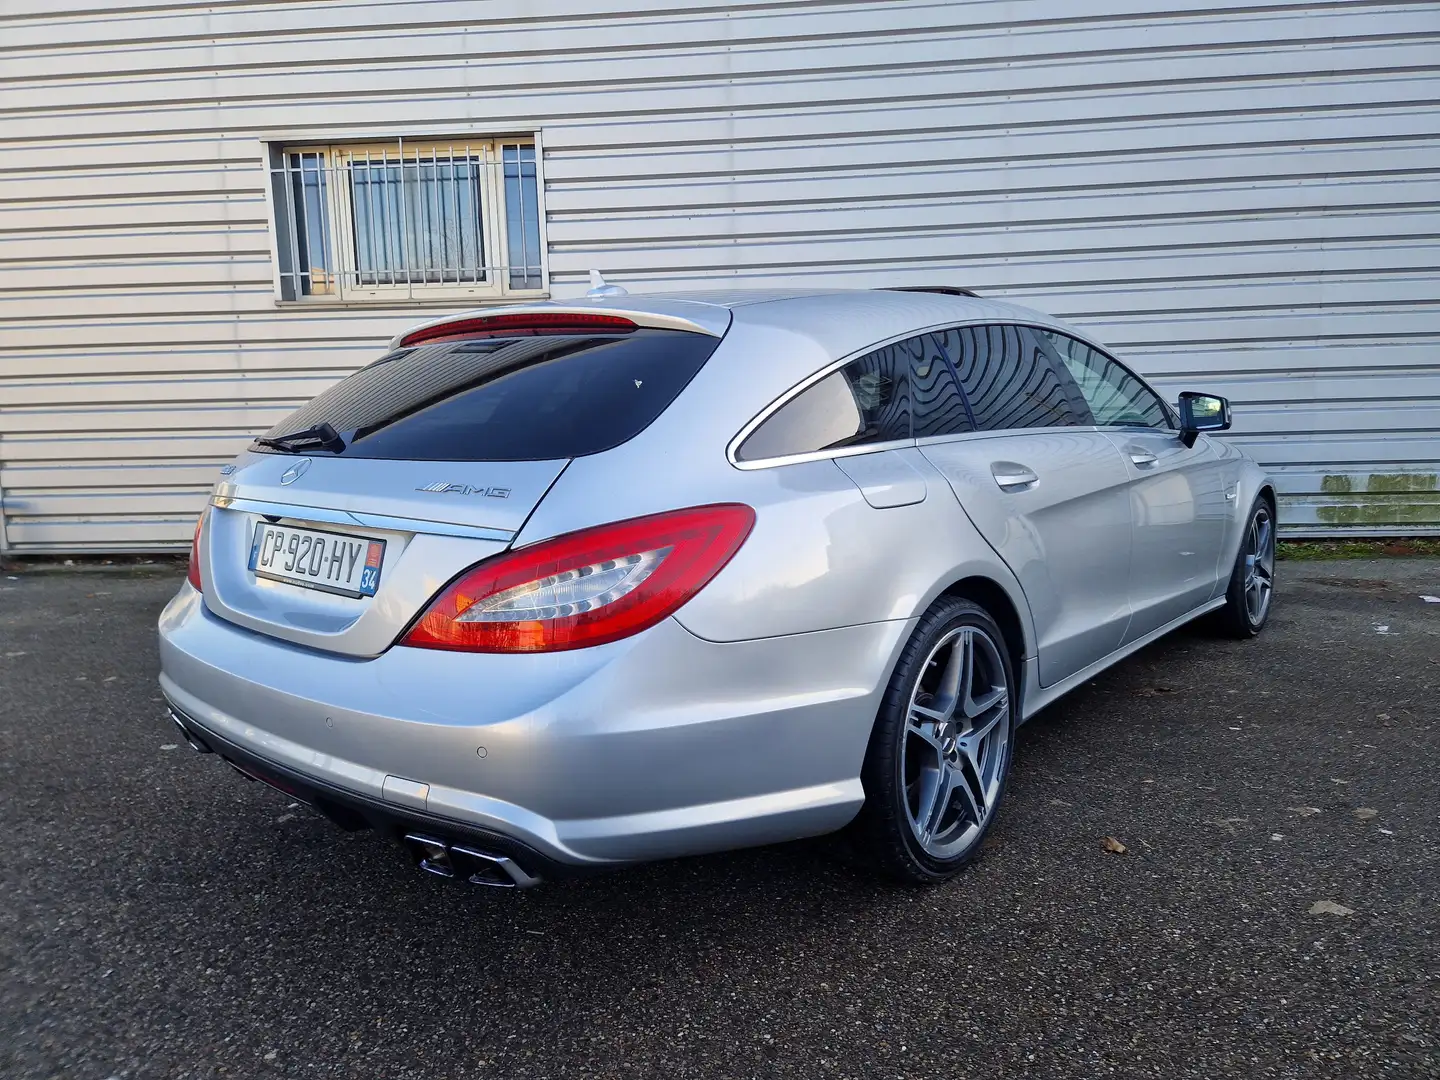 Mercedes-Benz CLS 63 AMG Classe  Shooting Brake   Edition 1 A siva - 2